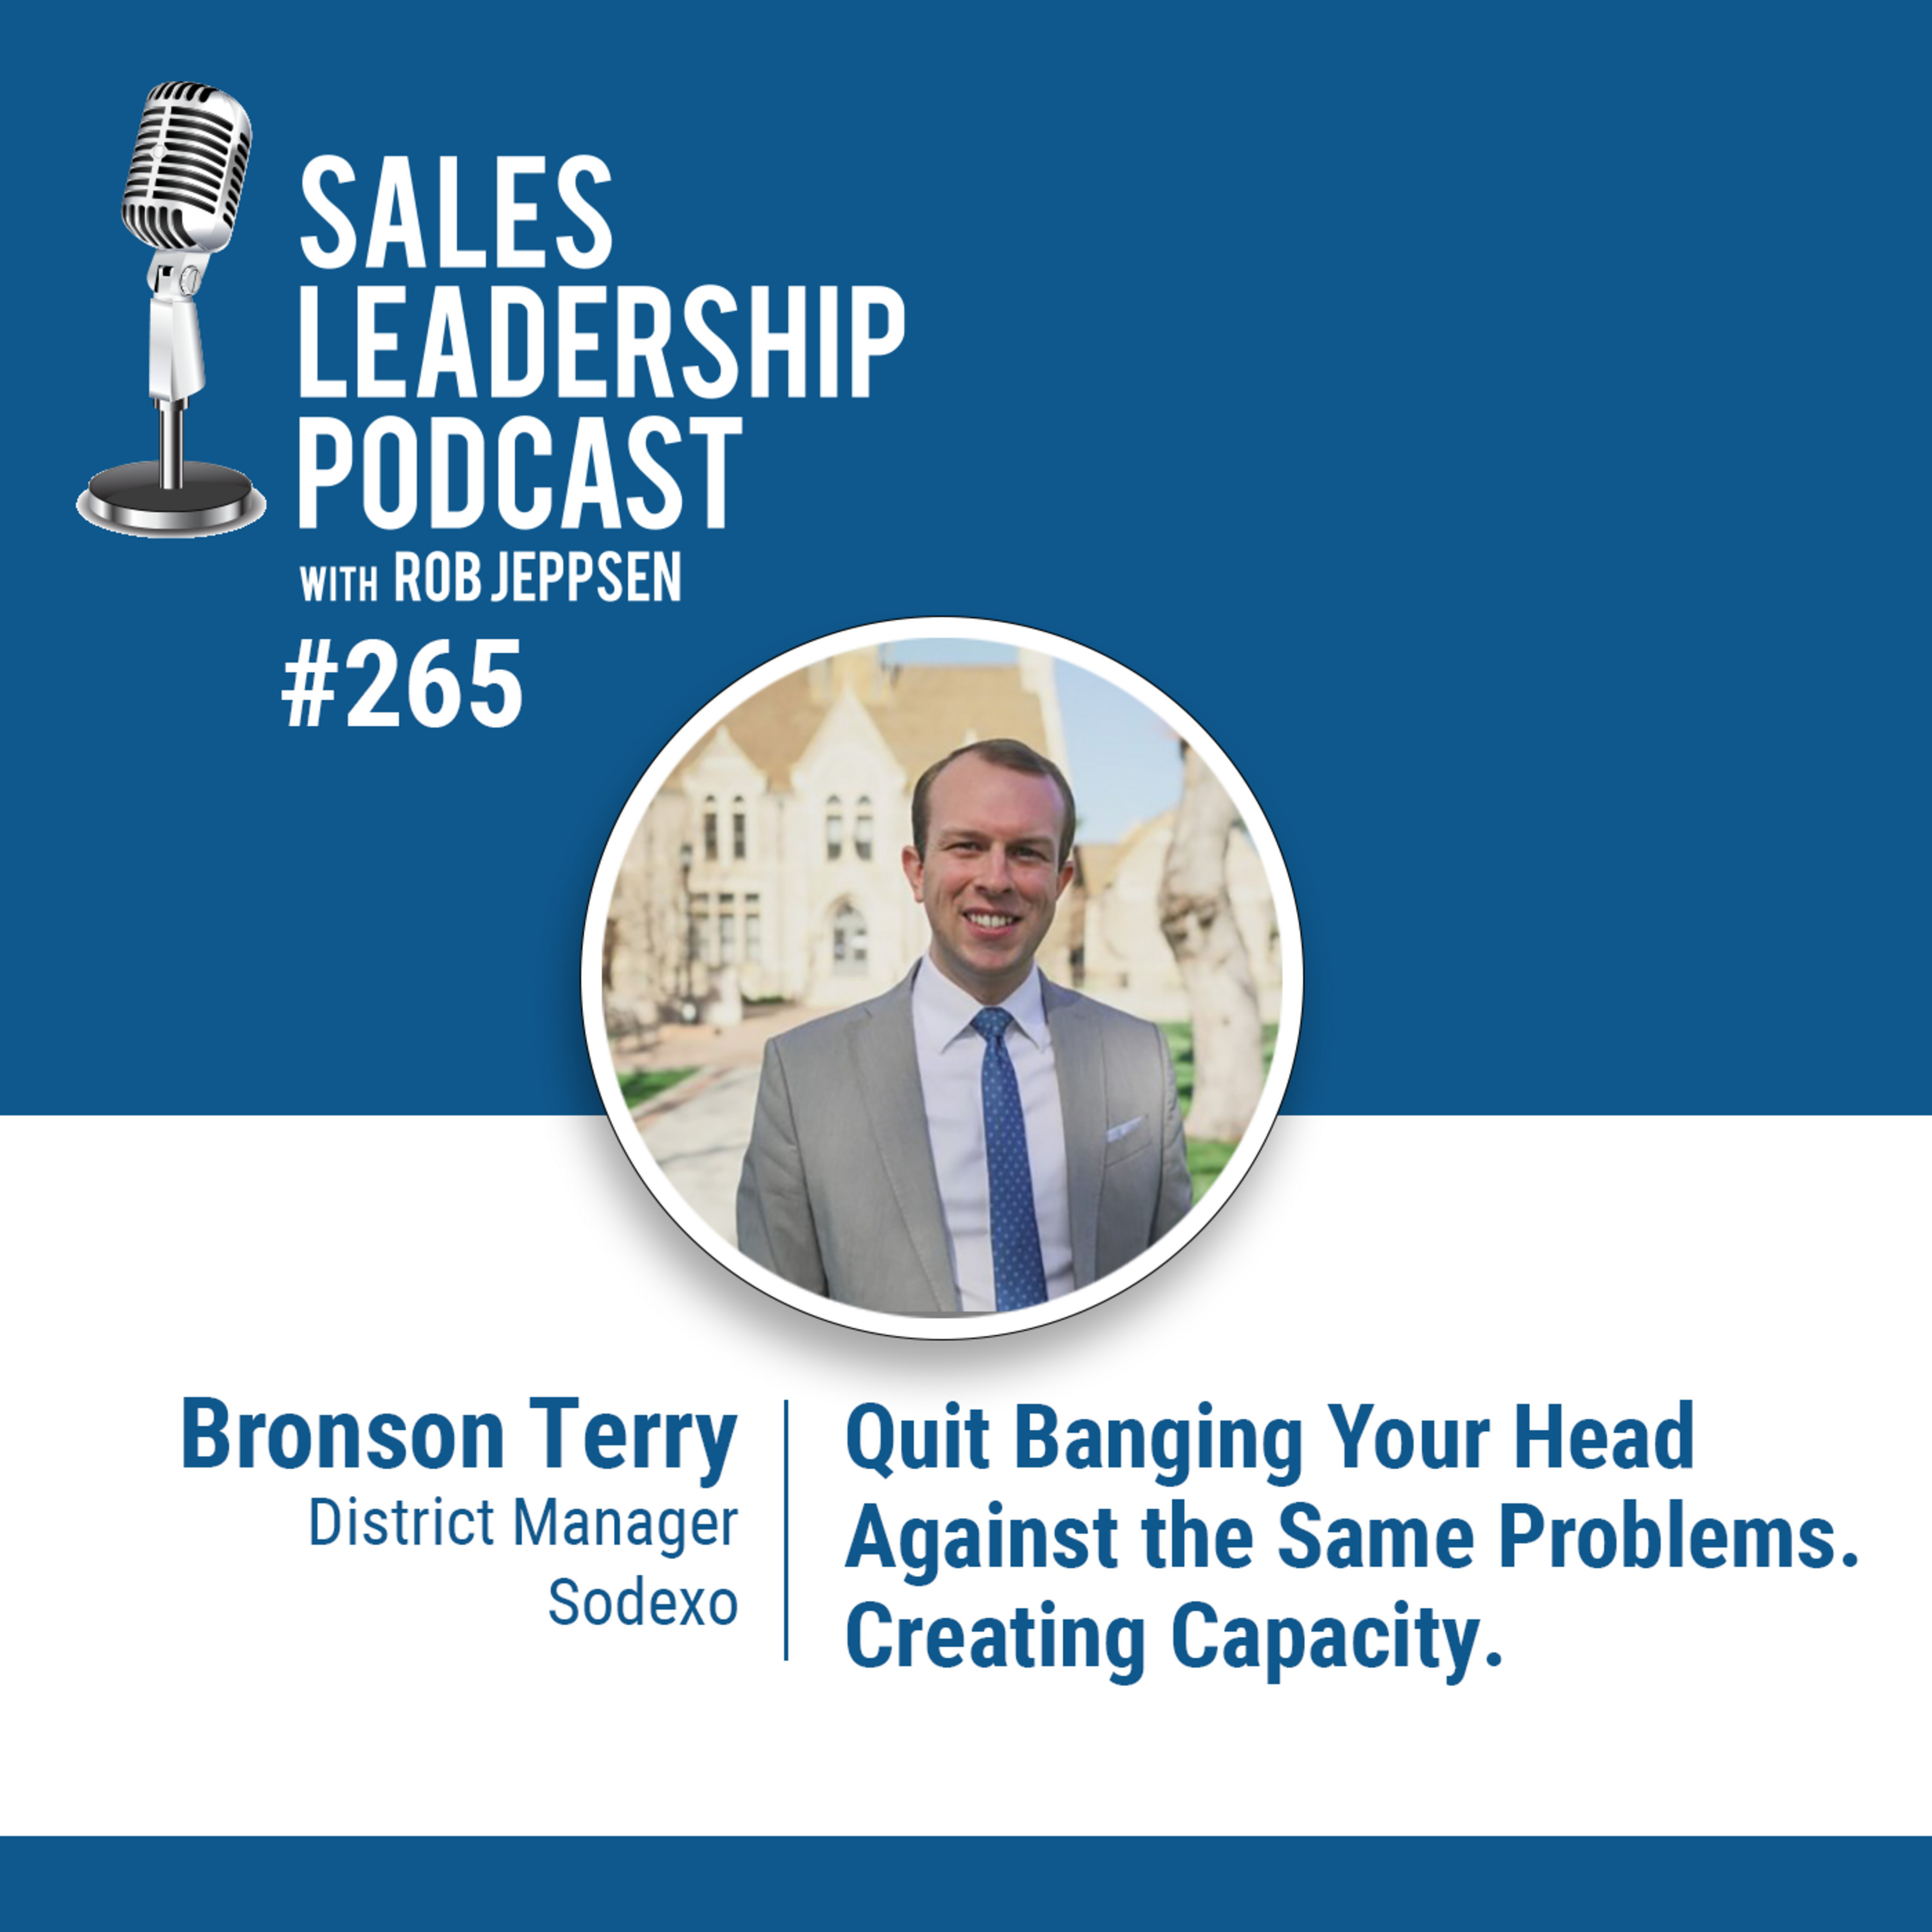 Episode 265: Bronson Terry, District Manager at Sodexo - Quit Banging Your Head Against the Same Problems. Creating Capacity.